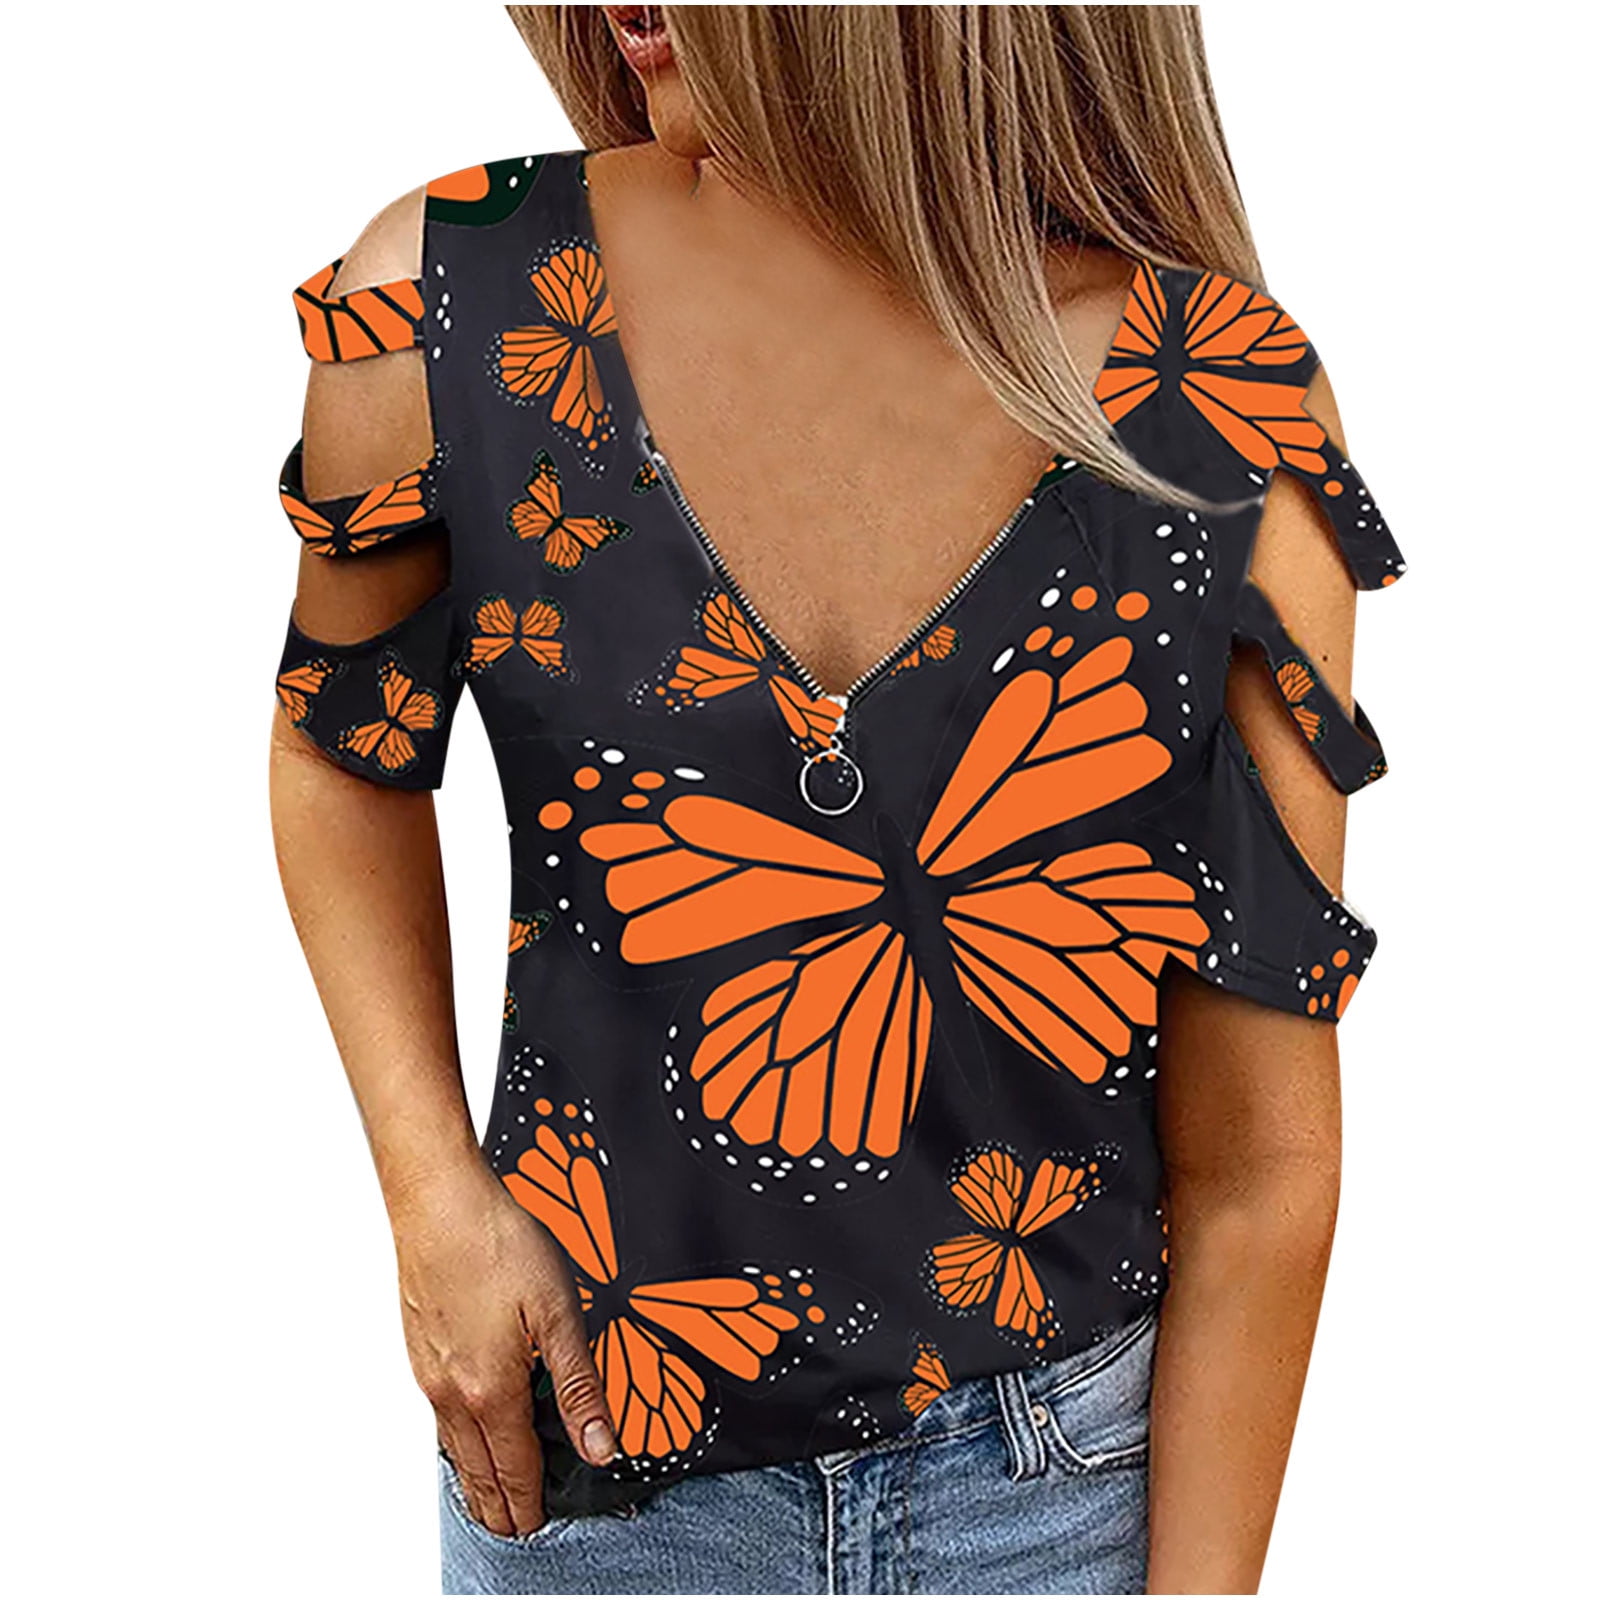 Women Printed Cold Shoulder T-shirt Blouse Ladies Short Sleeve Casual Tunic Tops 